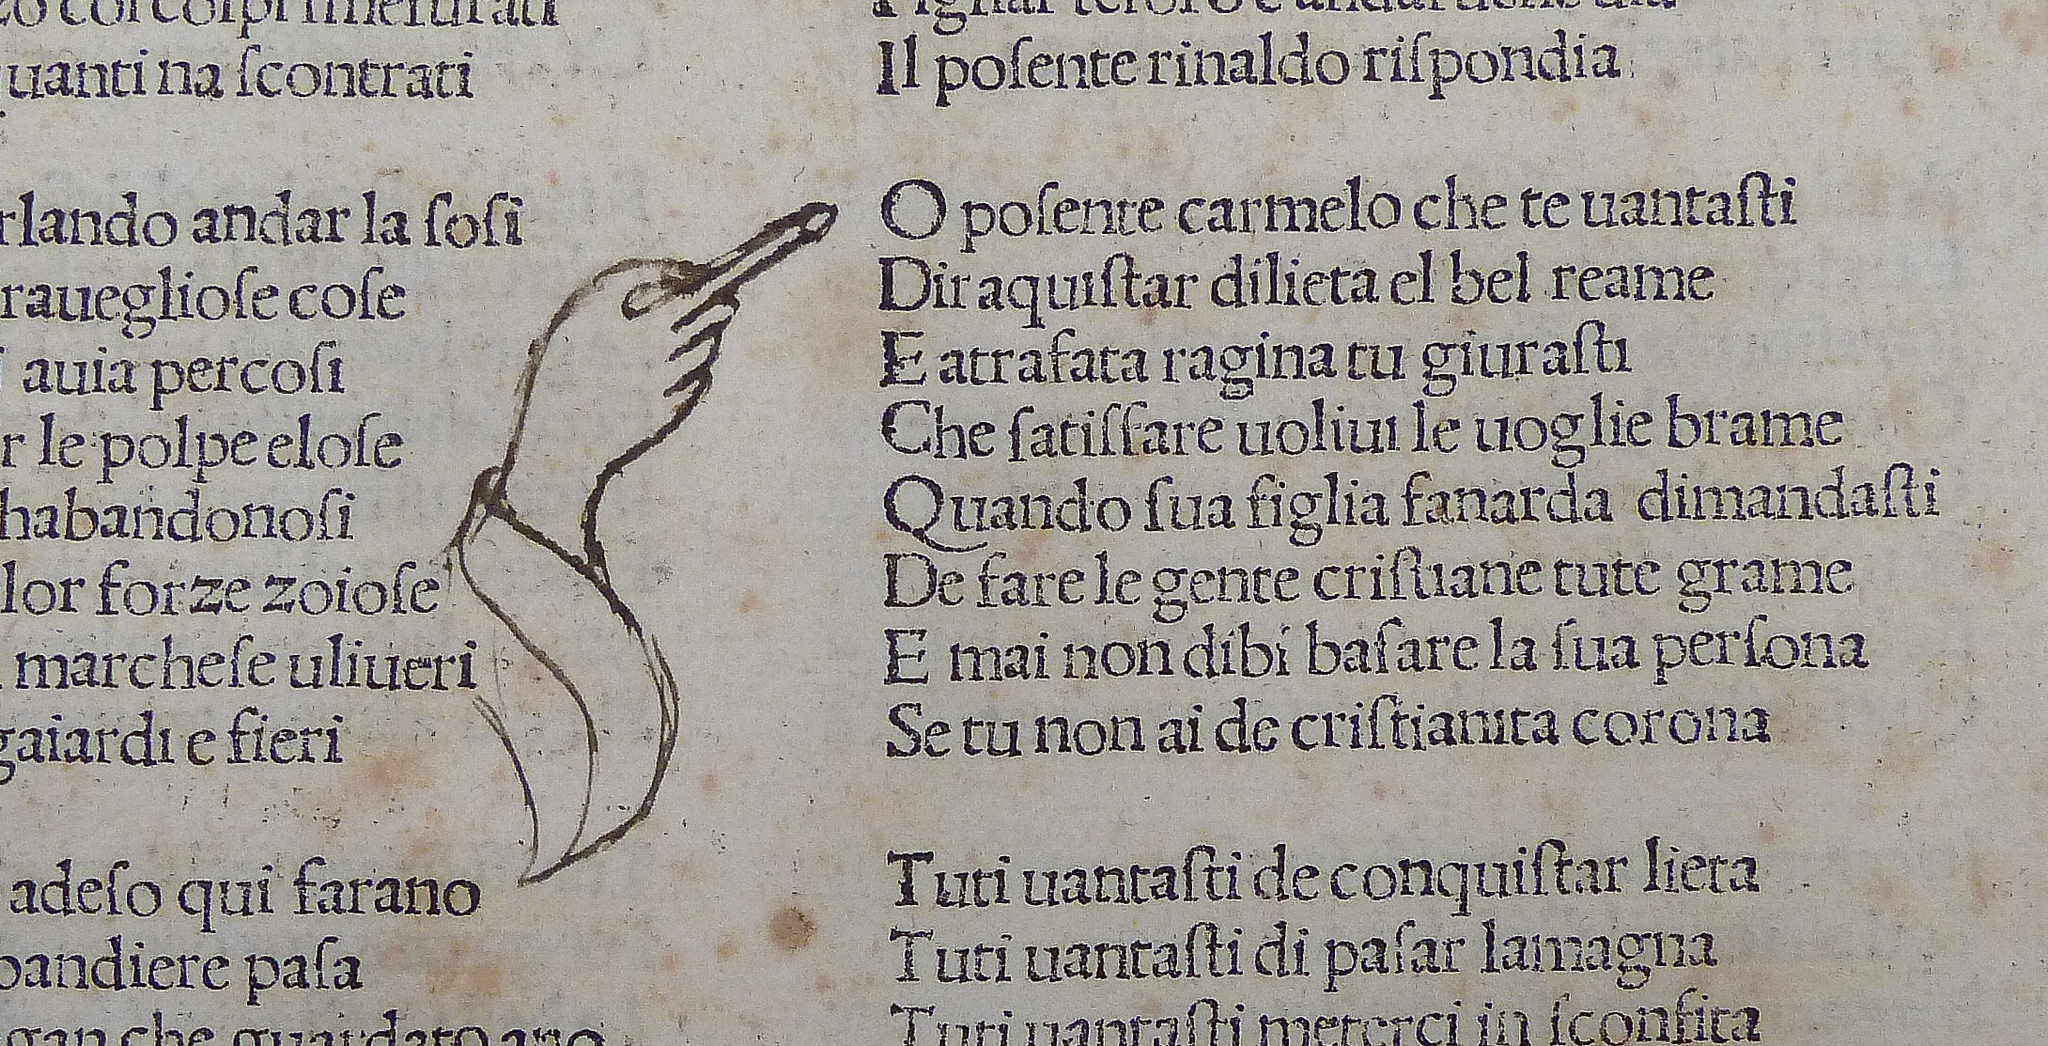 A picture of a book, written in Latin, with a drawn picture of a hand pointing to a paragraph of text